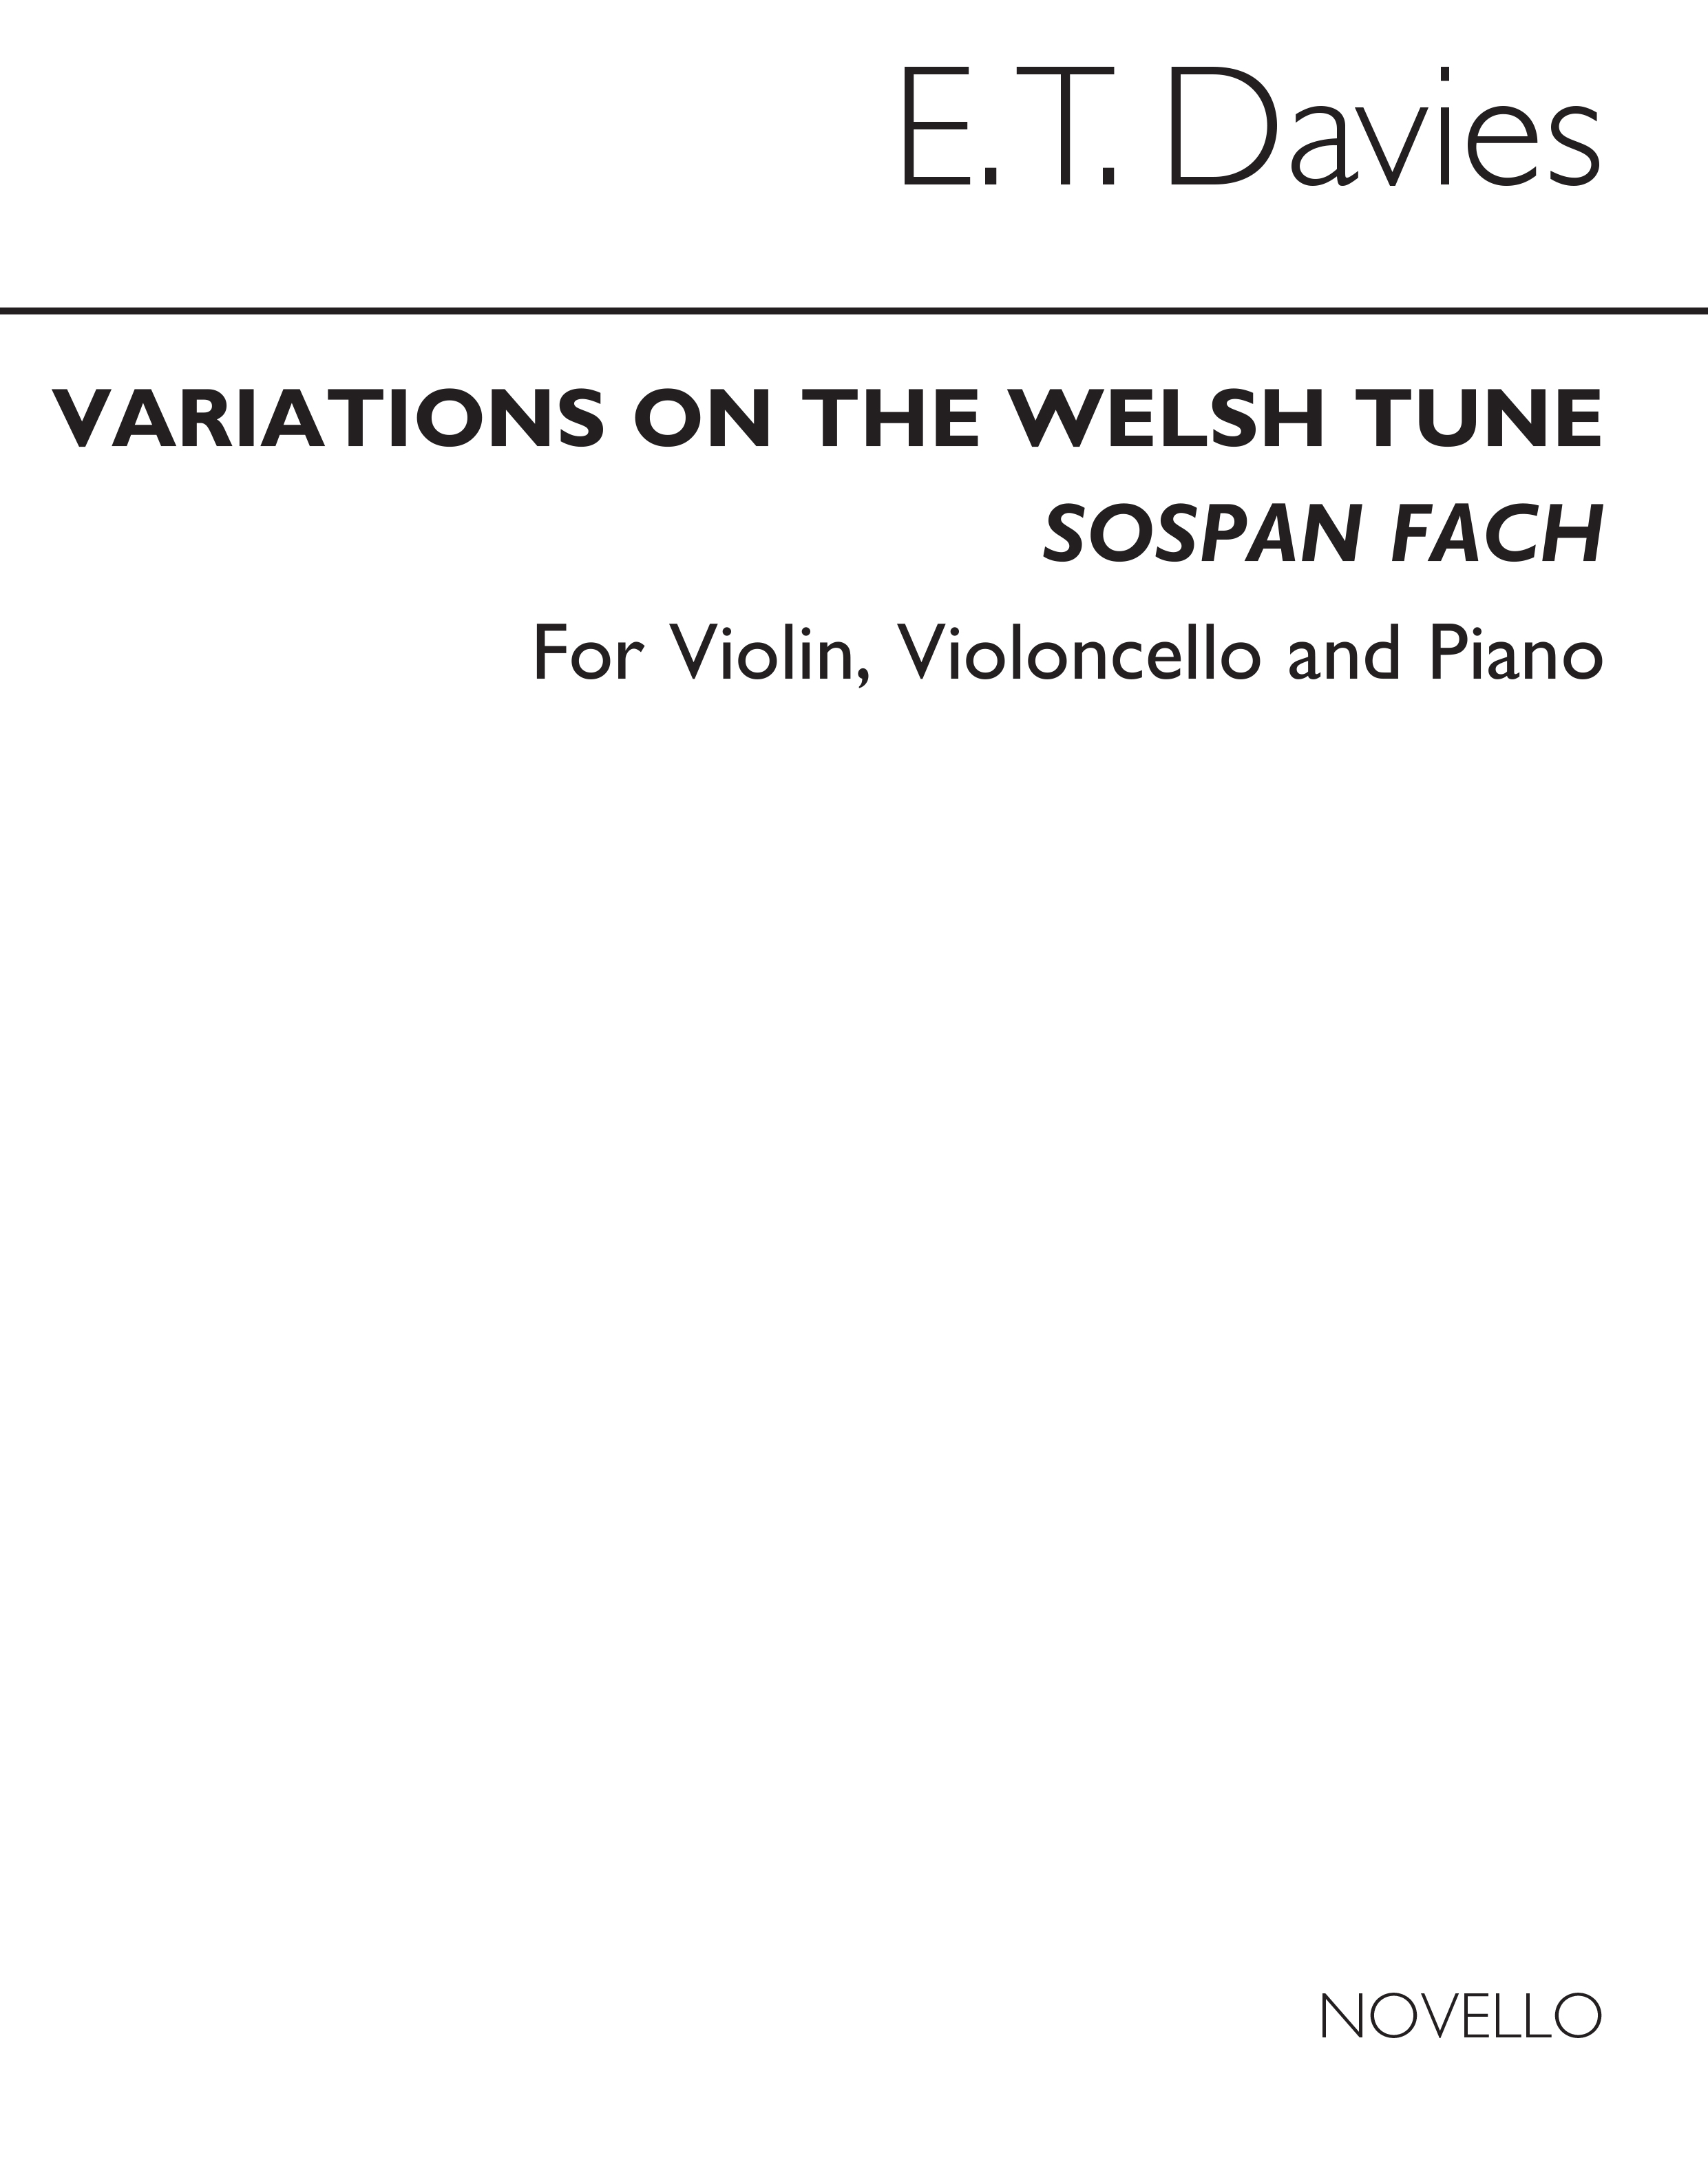 E.T. Davies: Variations On A Welsh Tune for Piano Trio: Piano Trio: Score and